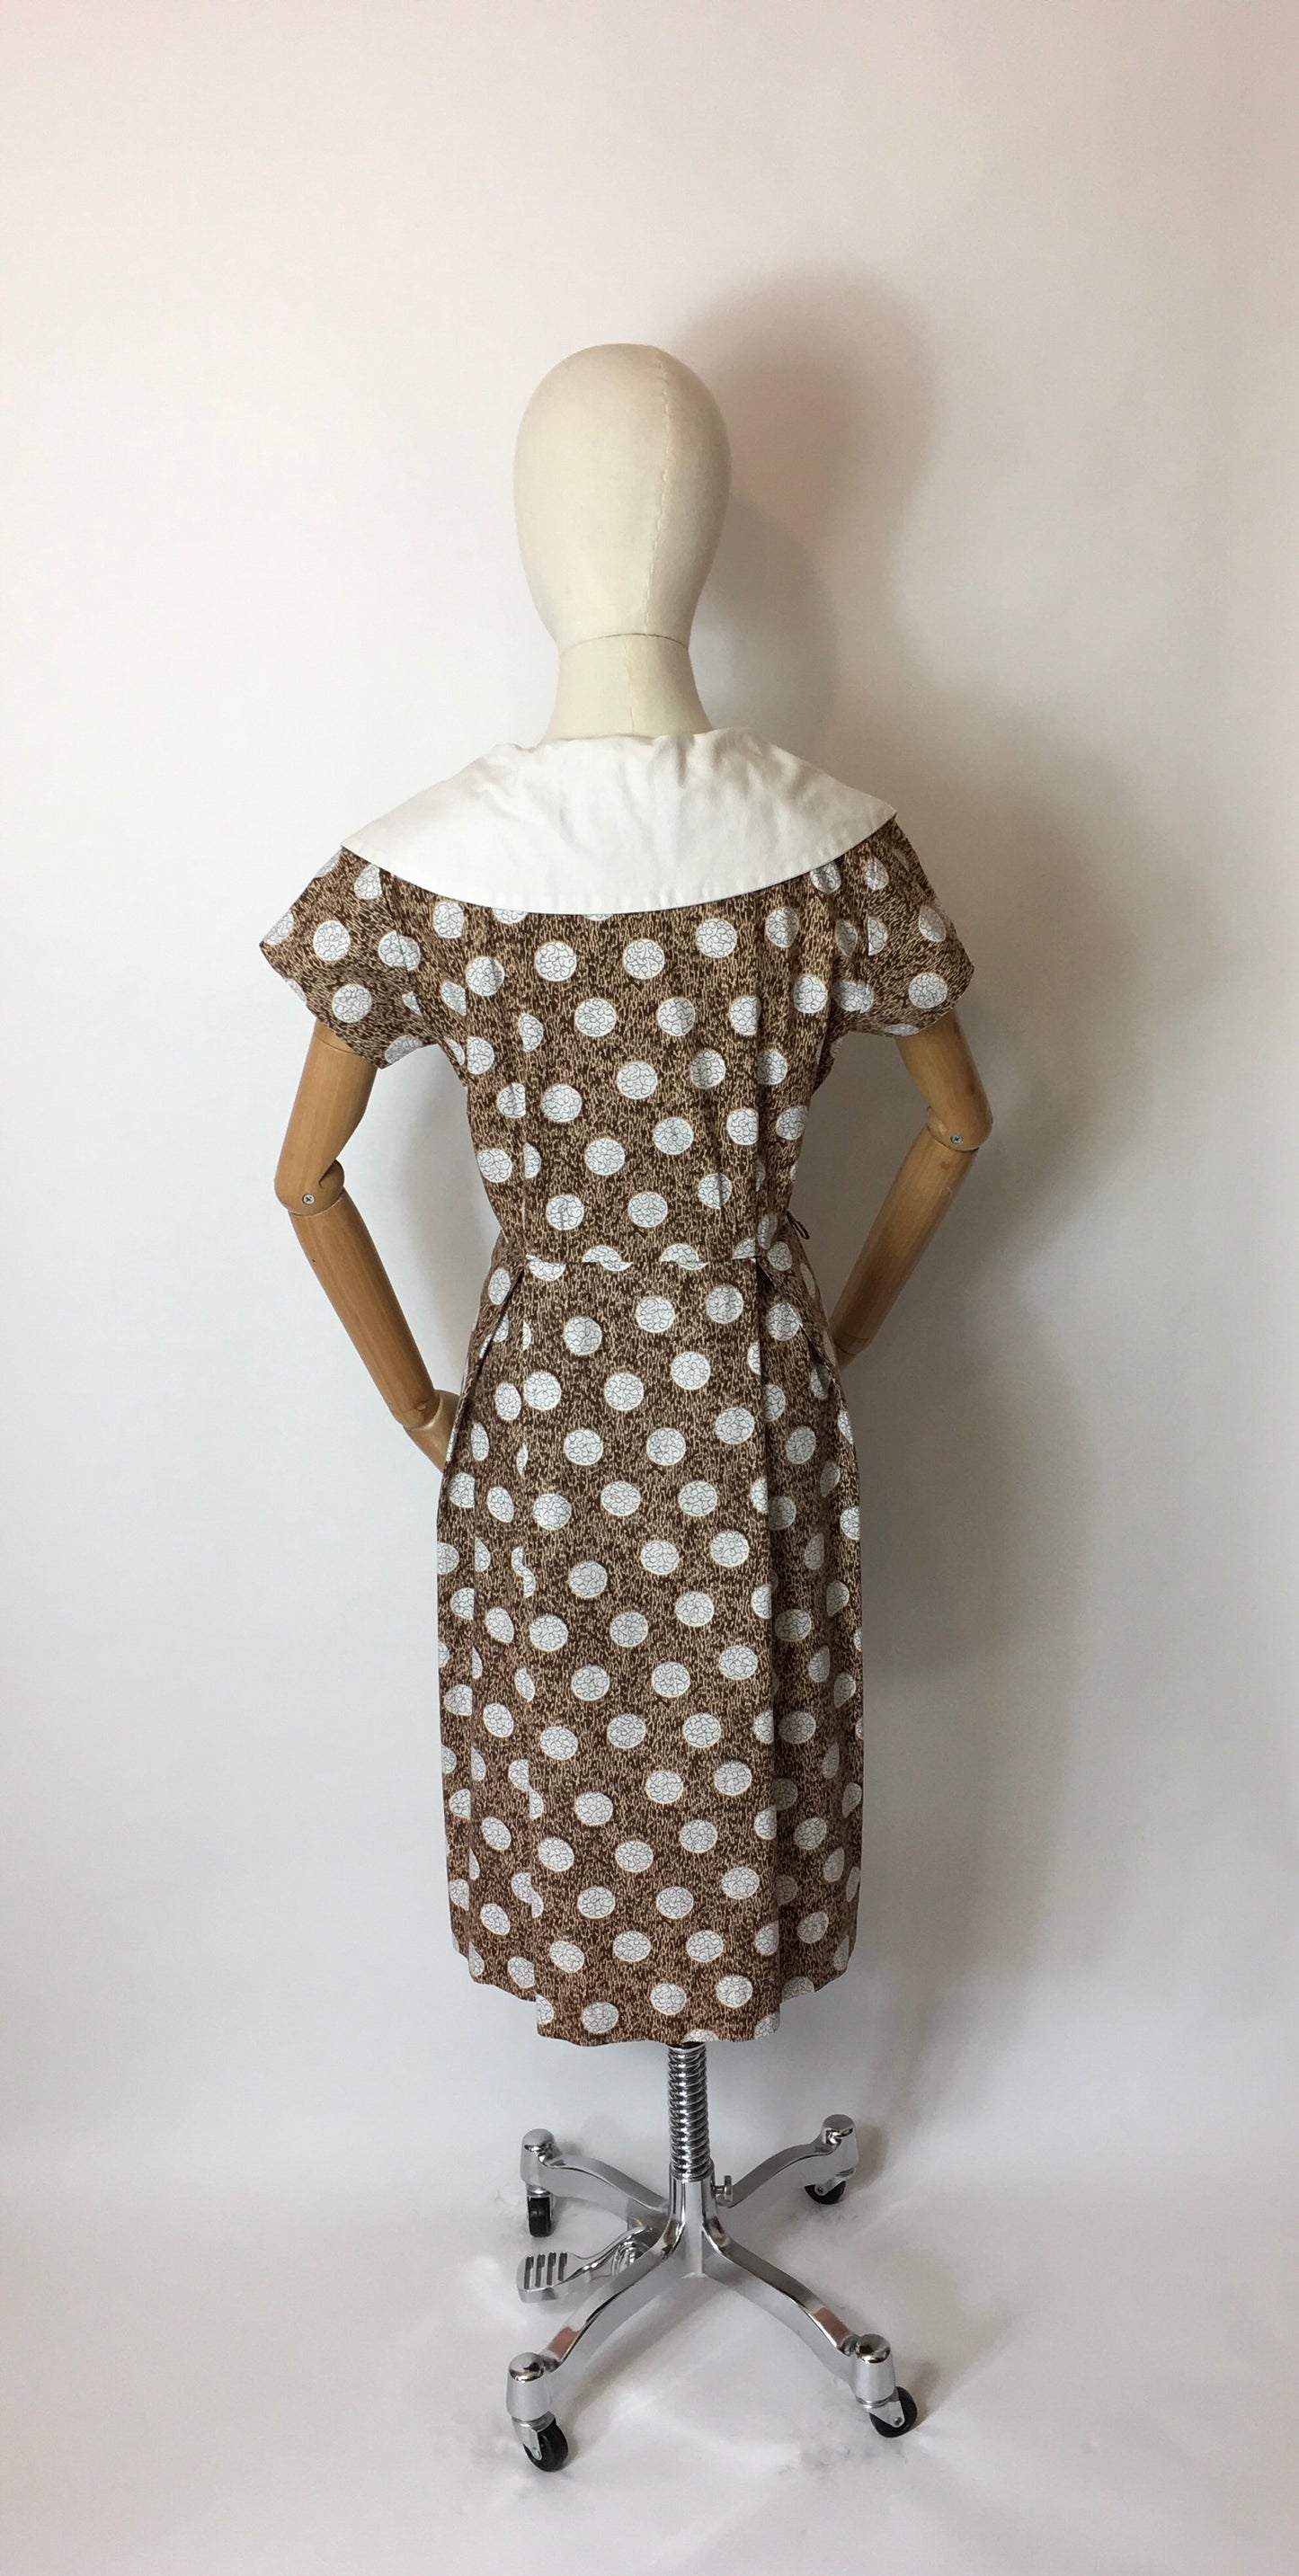 Original 1950s Cotton Day Dress - Lovely Geometric Print in Browns, Beiges and Whites